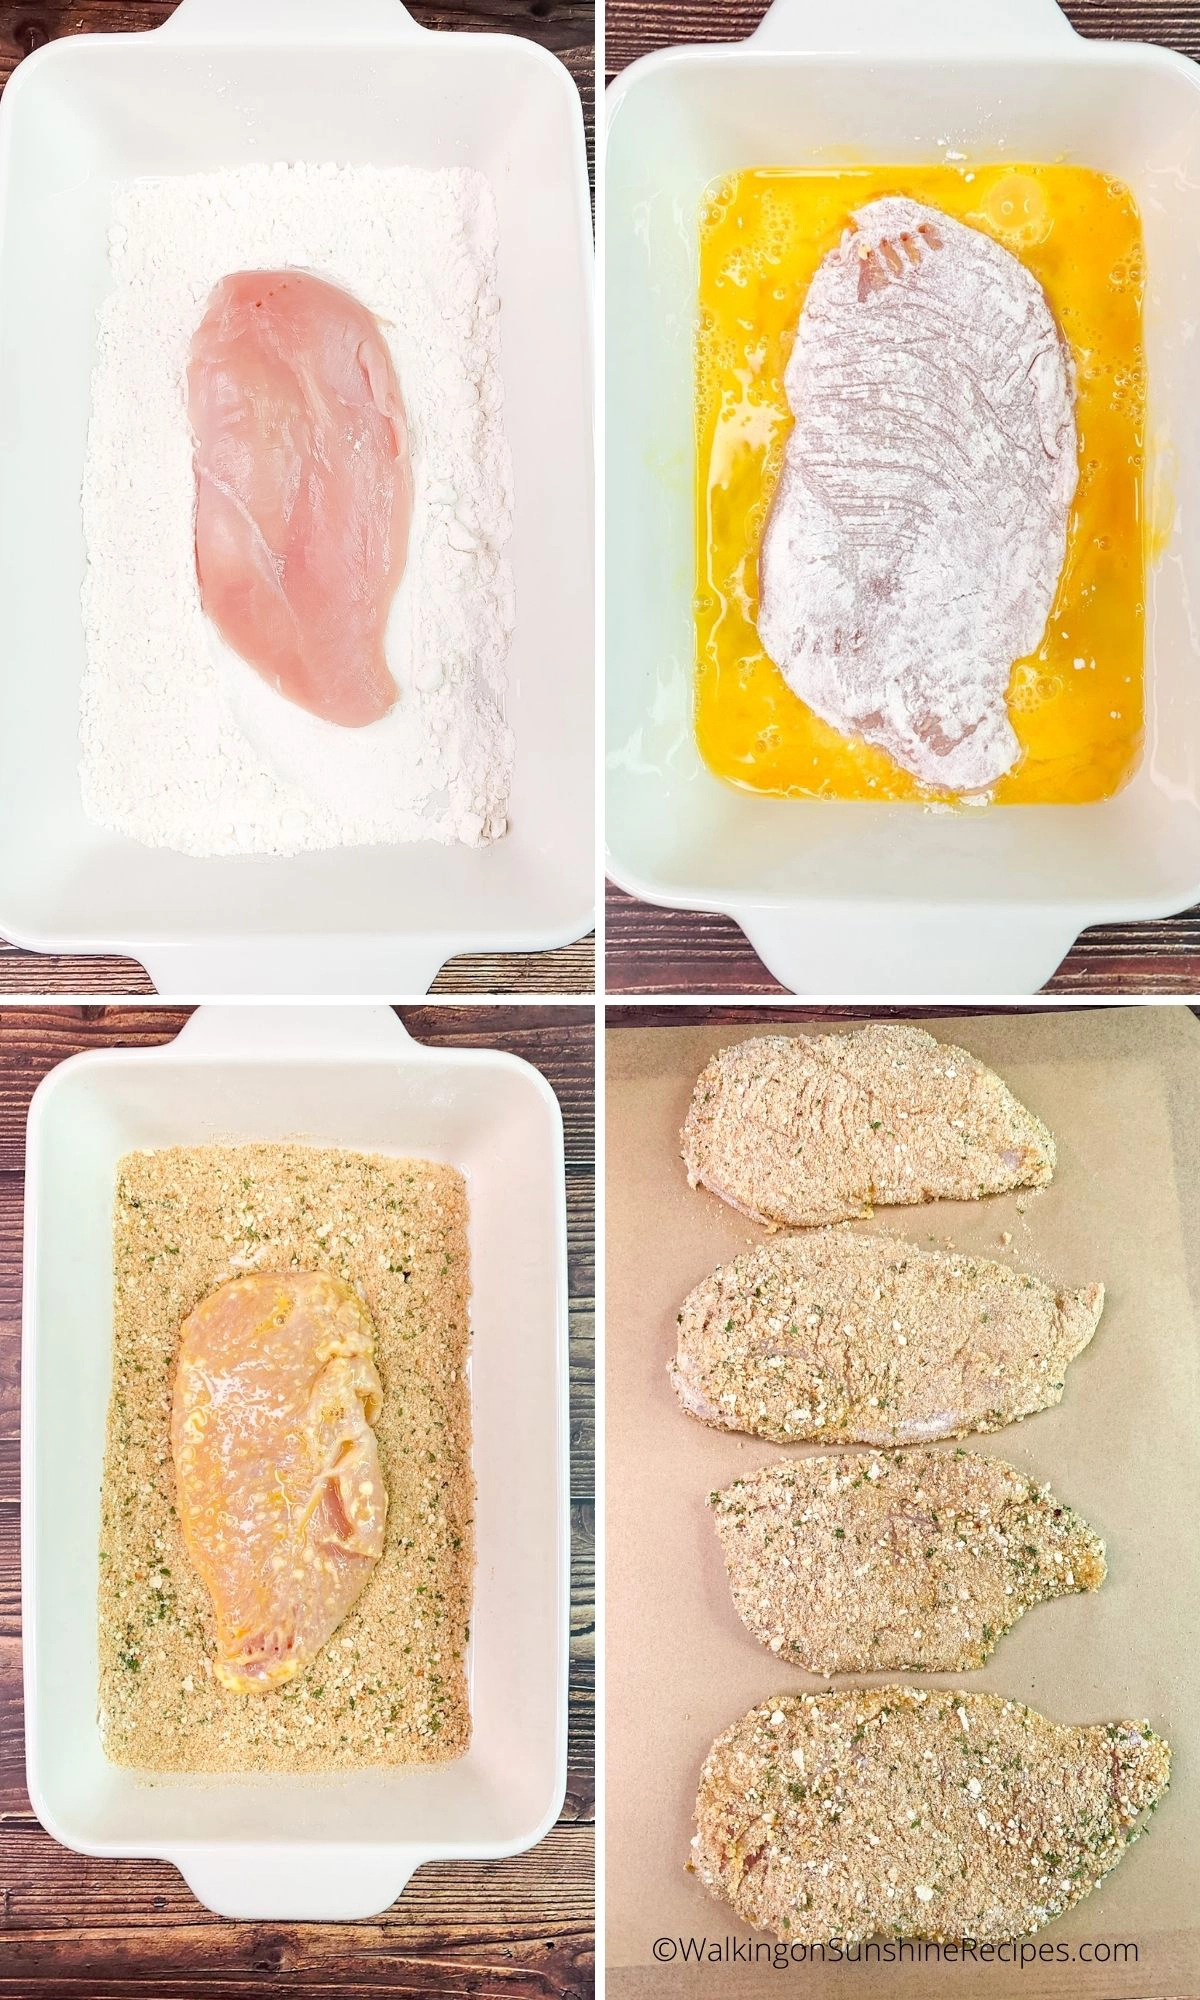 breadcrumbs, flour and egg mixture for chicken. 